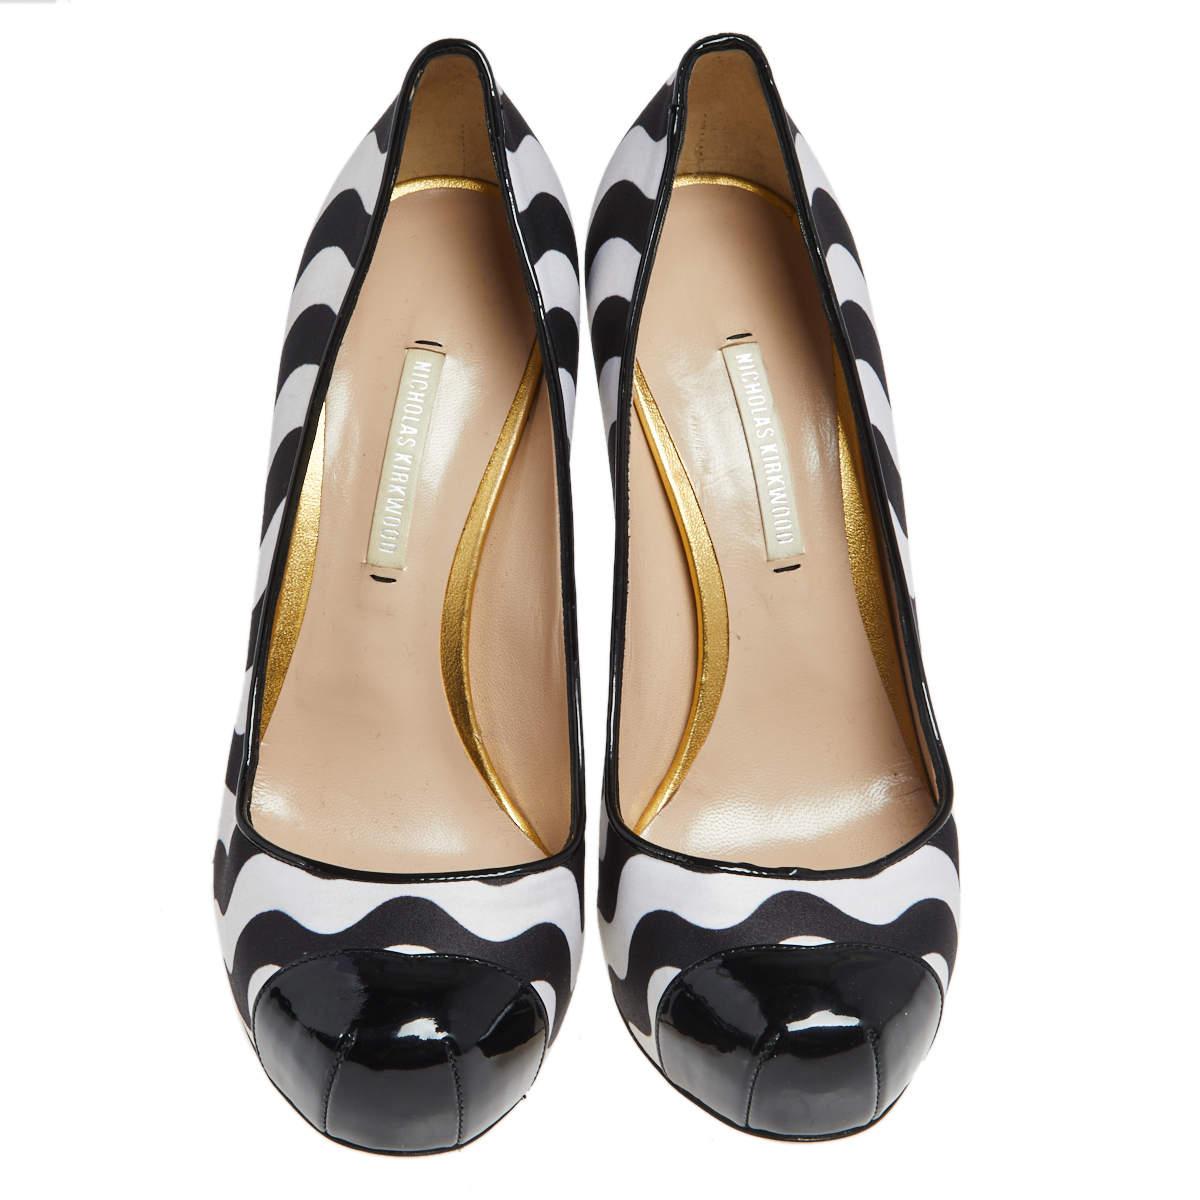 These pumps from the House of Nicholas Kirkwood are truly the best buy! They are crafted using black-white satin and patent leather and feature cap toes, a slip-on style, and slender heels. These pumps will revamp your style in seconds.

